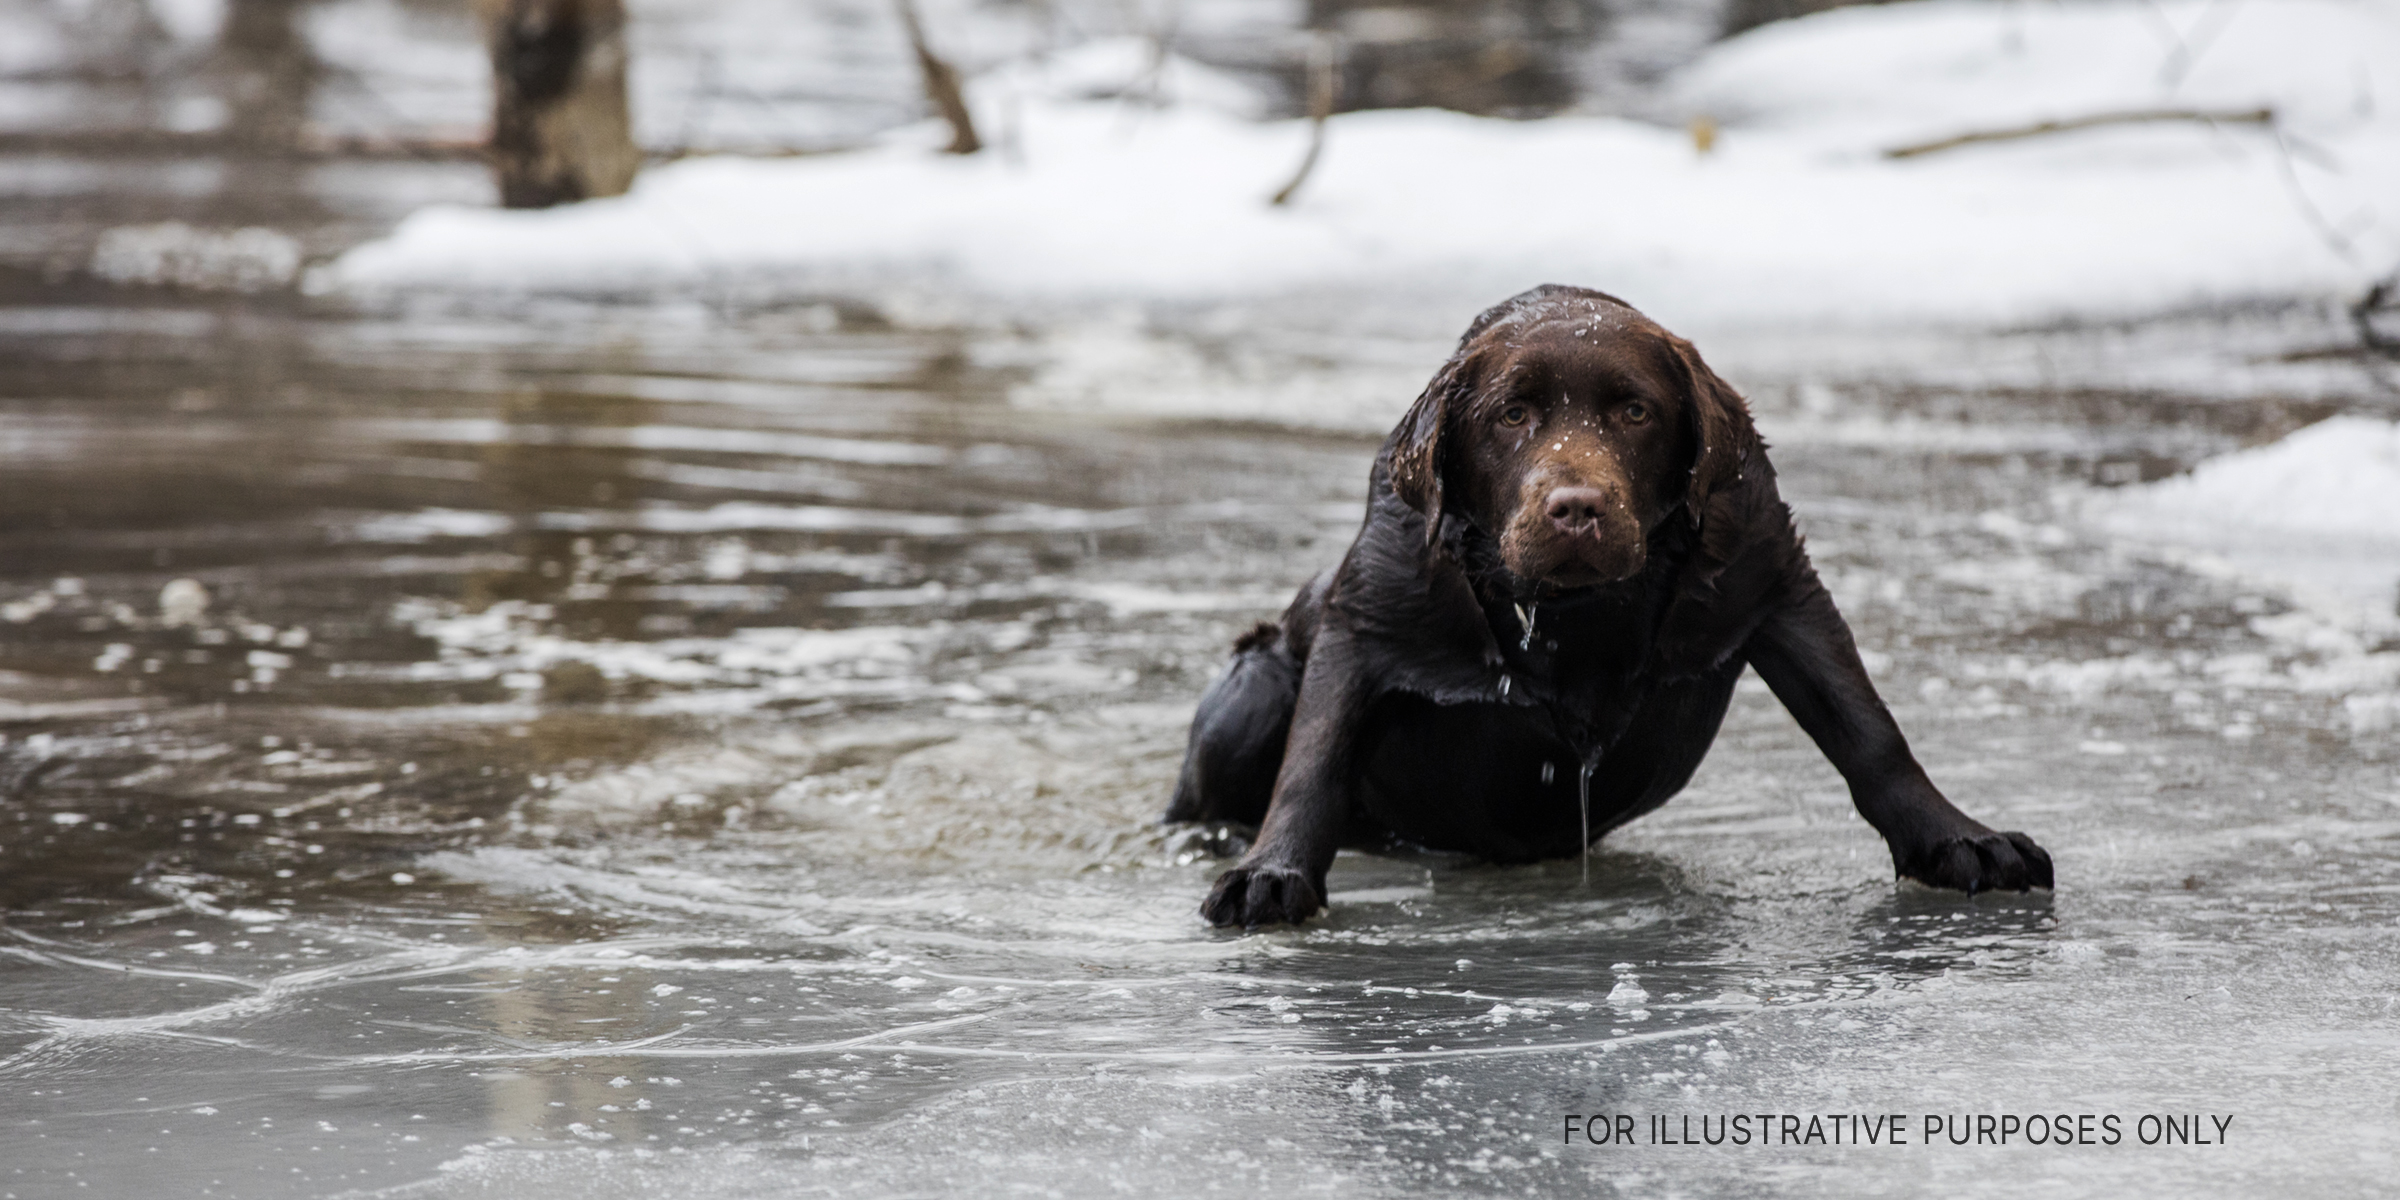 Dog in icy water | Source: Getty Images